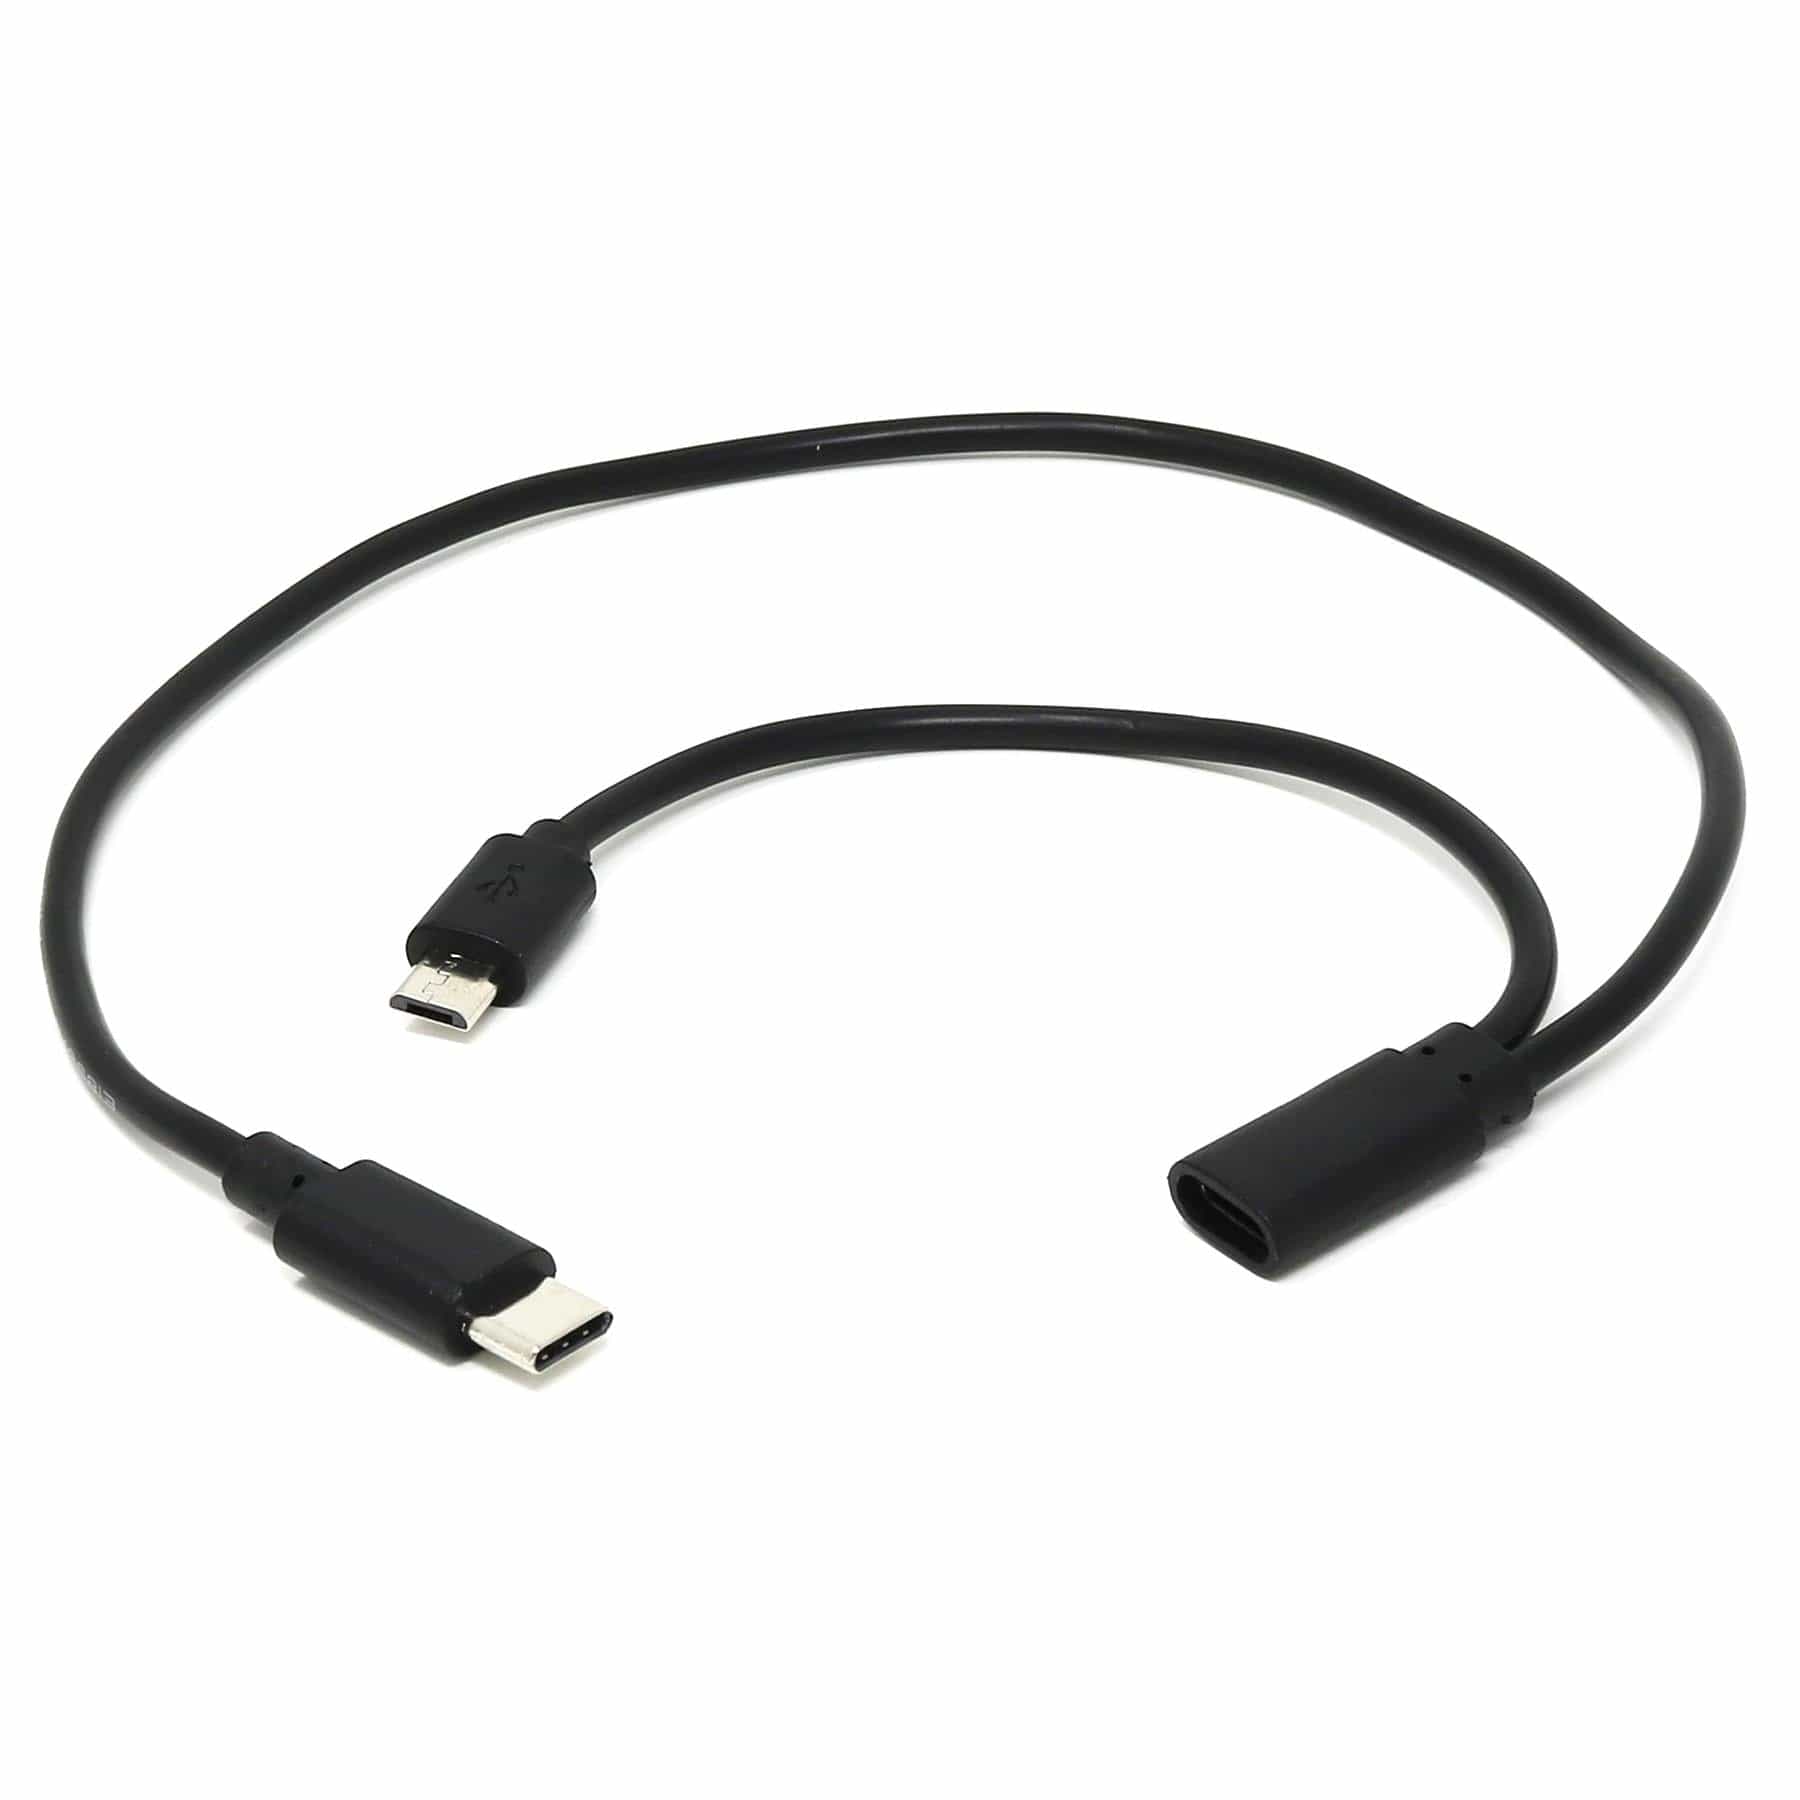 Custom OTG Cable for 8 Pins Iphone/ipad, Usb-c, Usb-b and Mirco Usb Connect  to AMP & DAC Audio 